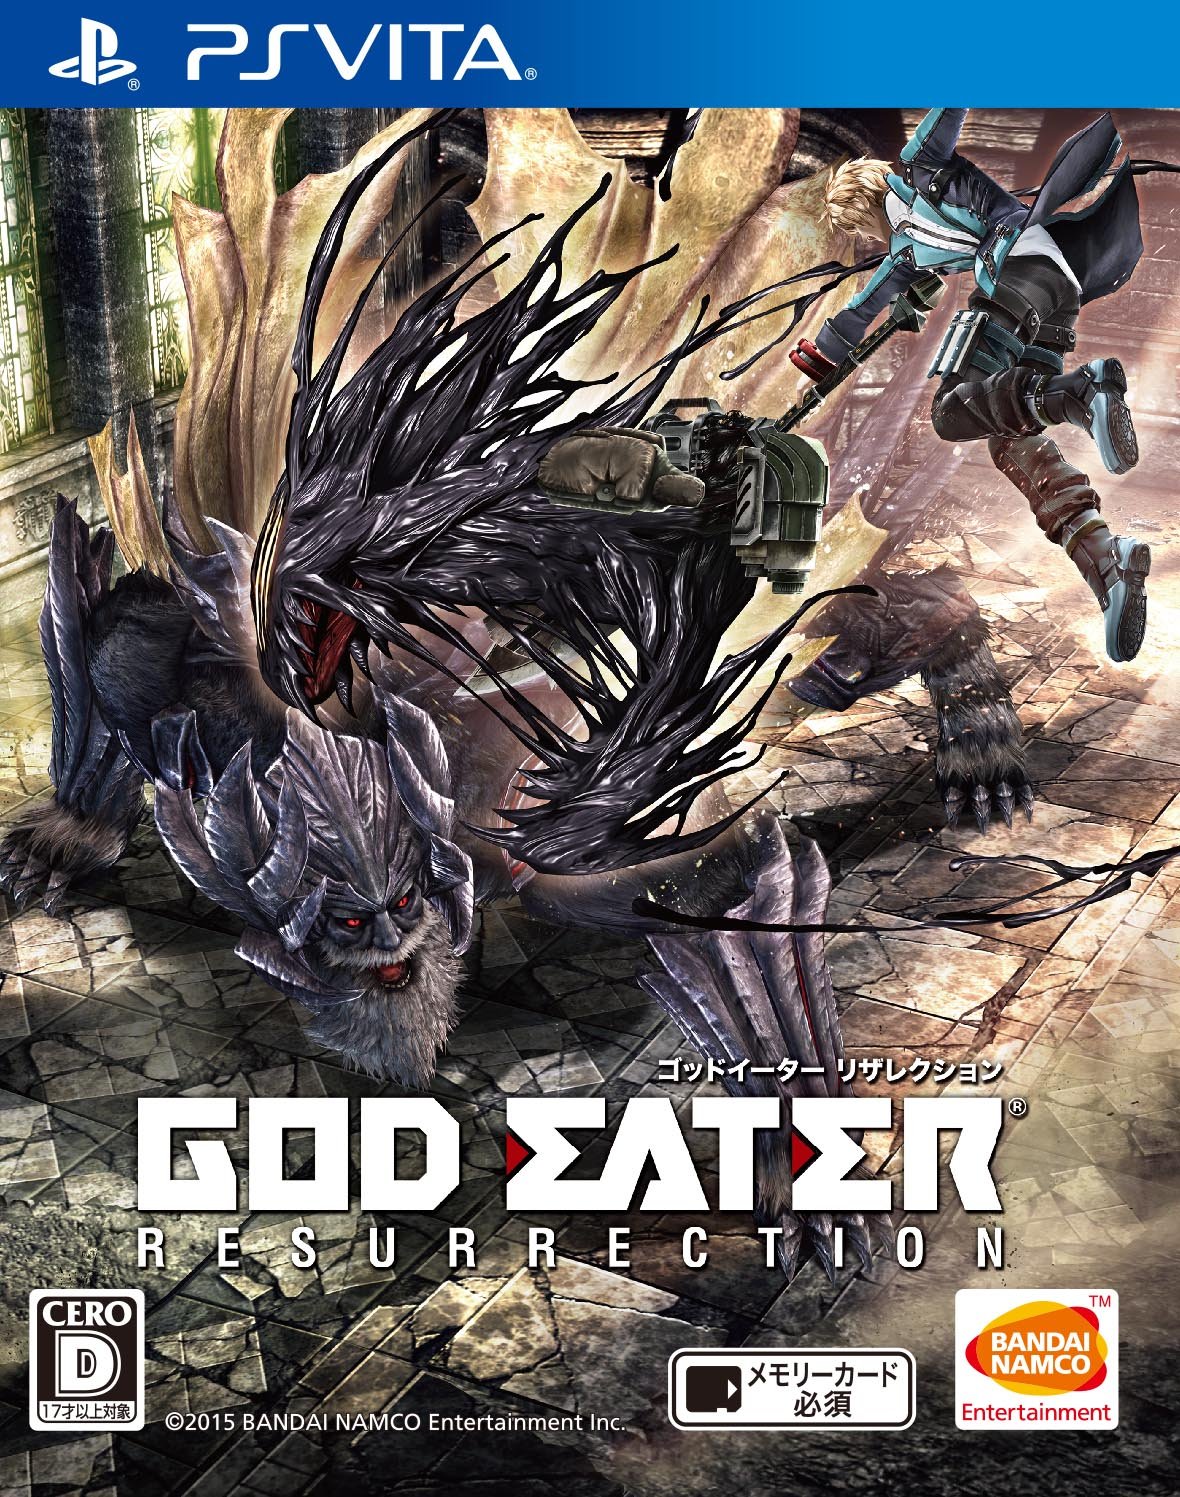 god-eater-resurrection-strategywiki-strategy-guide-and-game-reference-wiki